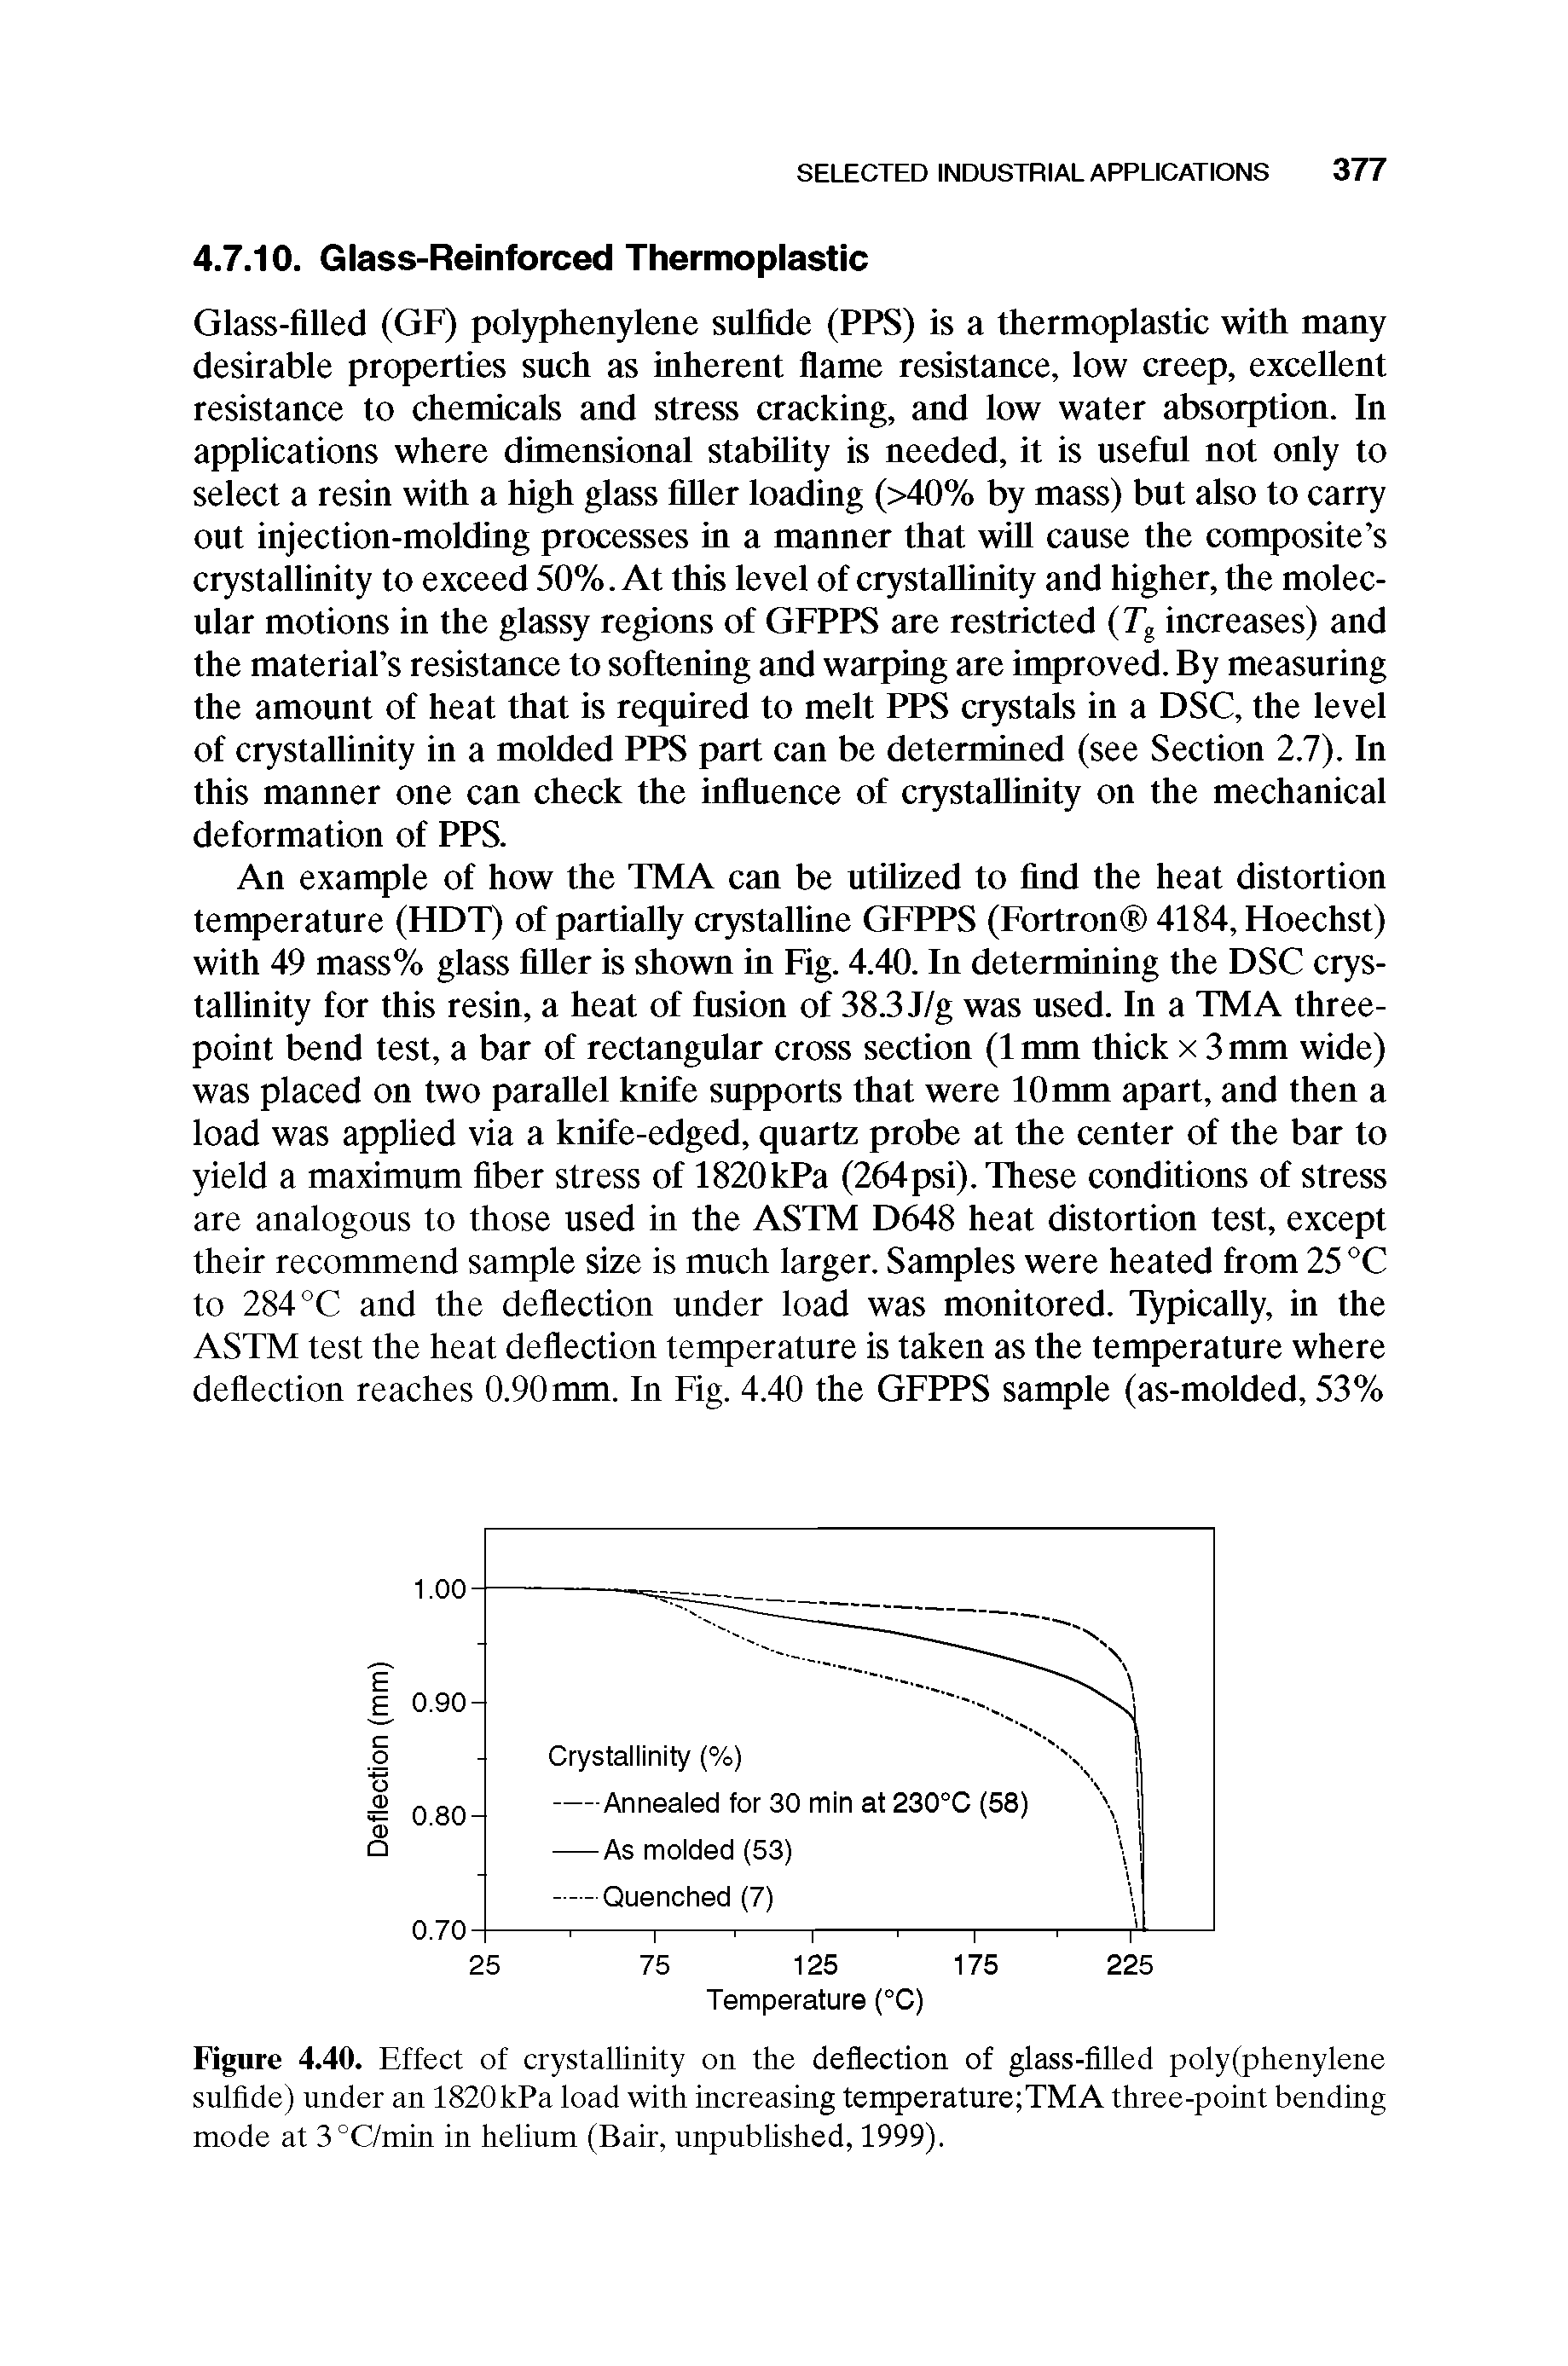 Figure 4.40. Effect of crystaUinity on the deflection of glass-fllled poly(phenylene sulfide) under an 1820kPa load with increasing temperature TMA three-point bending mode at 3°C/min in helium (Bair, unpubhshed, 1999).